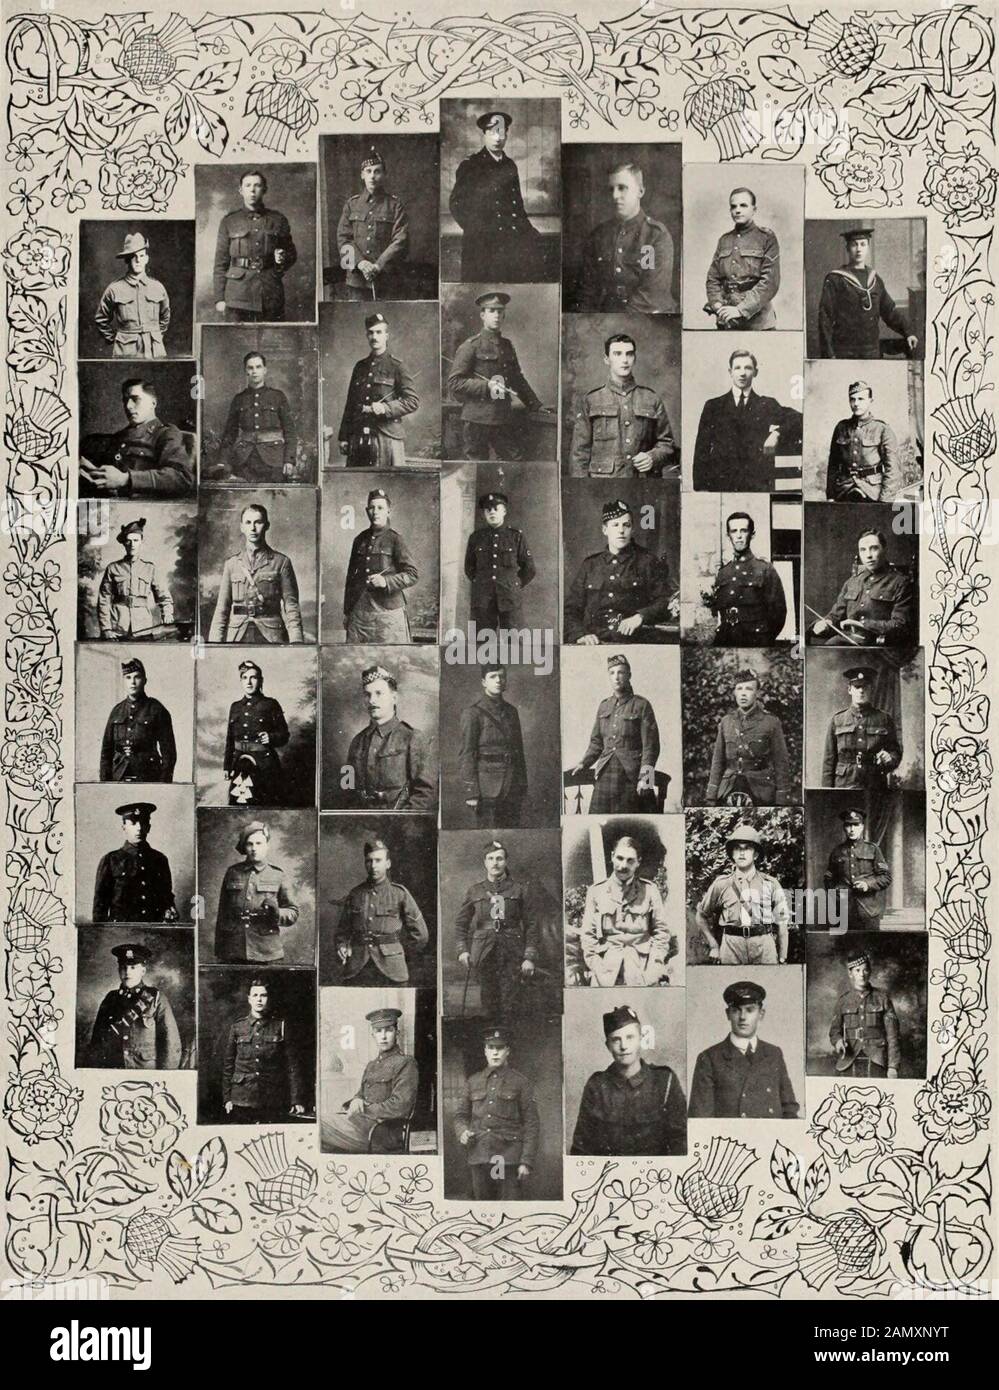 Roll of honour of the pupils and staff of Dunfermline High School . G. Muir; /..-Cf&gt;l. T. Cooler. Pte. G. Farmes; Pte. -M. Paton; 1st Row— Lt. J. MGregror; Pte. J. Brown  Pion. J. Barber: Lt. J. Morson; Cdt. G. Hig-gs; Dr2nd Row—Pte. A. Low, .1/..1/. ; Pte. W. Hendry; Lt. D. Thomson; Gr. J. MGregor; Cdt. F. Marshall. 3rd Row—Pte. J. Paterson : Pte. I). Broun ; Pte. D. Thompson ; Pte. A. Brown ; L.-Cpl. V. Wilson ; Pte. G. Kemp ; Gr. W. Black.4th Row—L.-Cpl. J. Beveridge ; Pte. I. Seaton ; /./. A. MKechnie ; L.-Cpl. A. Clark ; Pte. D. Bernard ; Pte. K. Brown ; Pte. J. Mitchell.5th Row—Cdt. Stock Photo